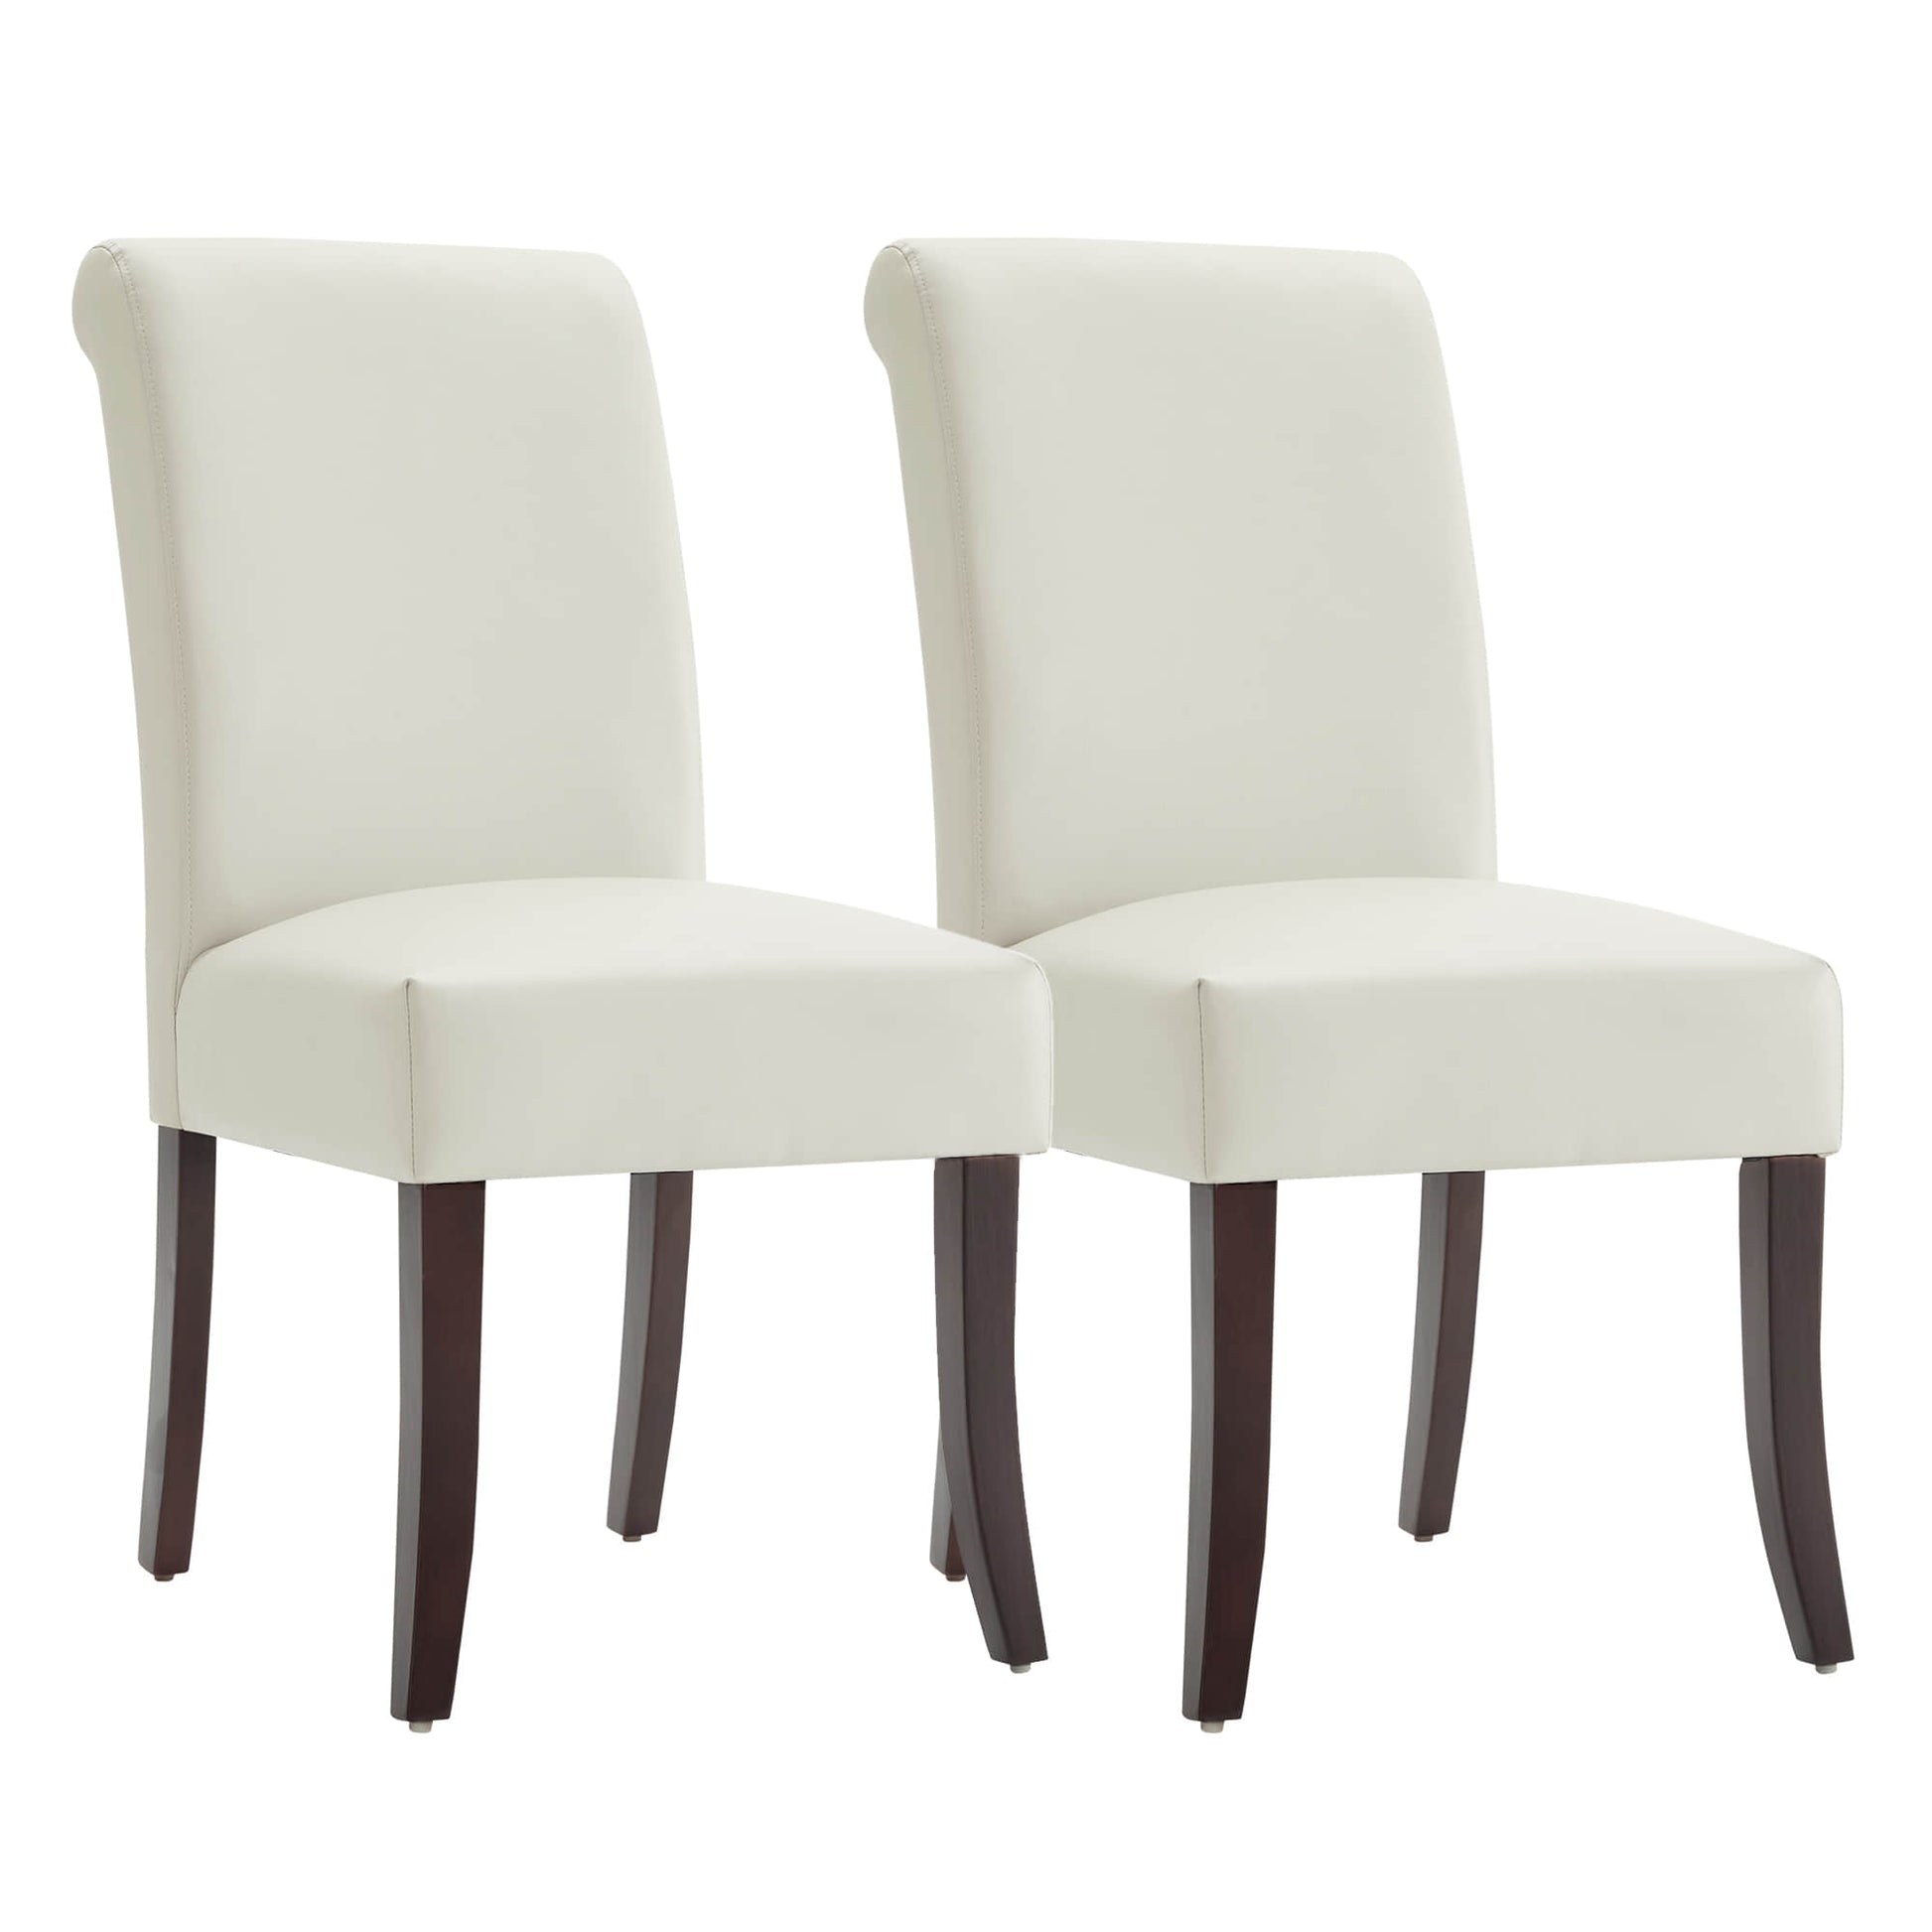 CHITA LIVING-Juniper Dining Chairs (Set of 2)-Dining Chairs-Faux Leather-Light Gray-